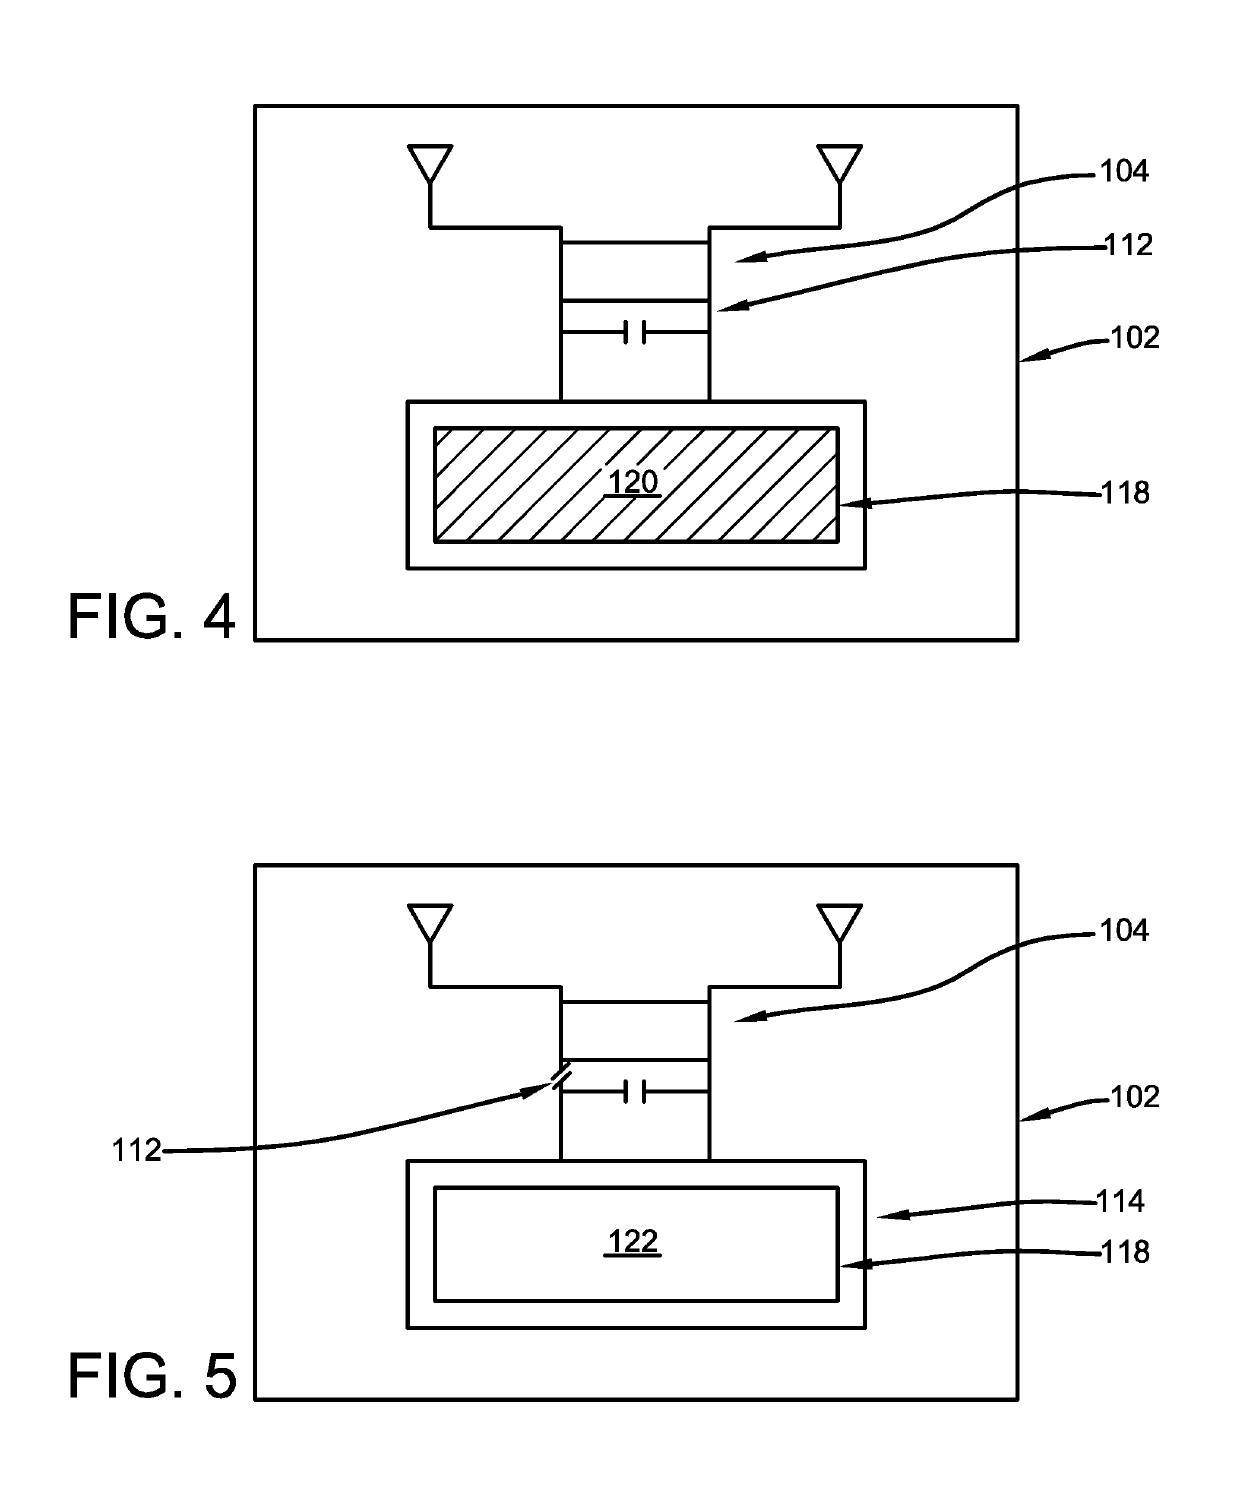 Interfacing Electronic Anti-Tamper Devices with Display Elements